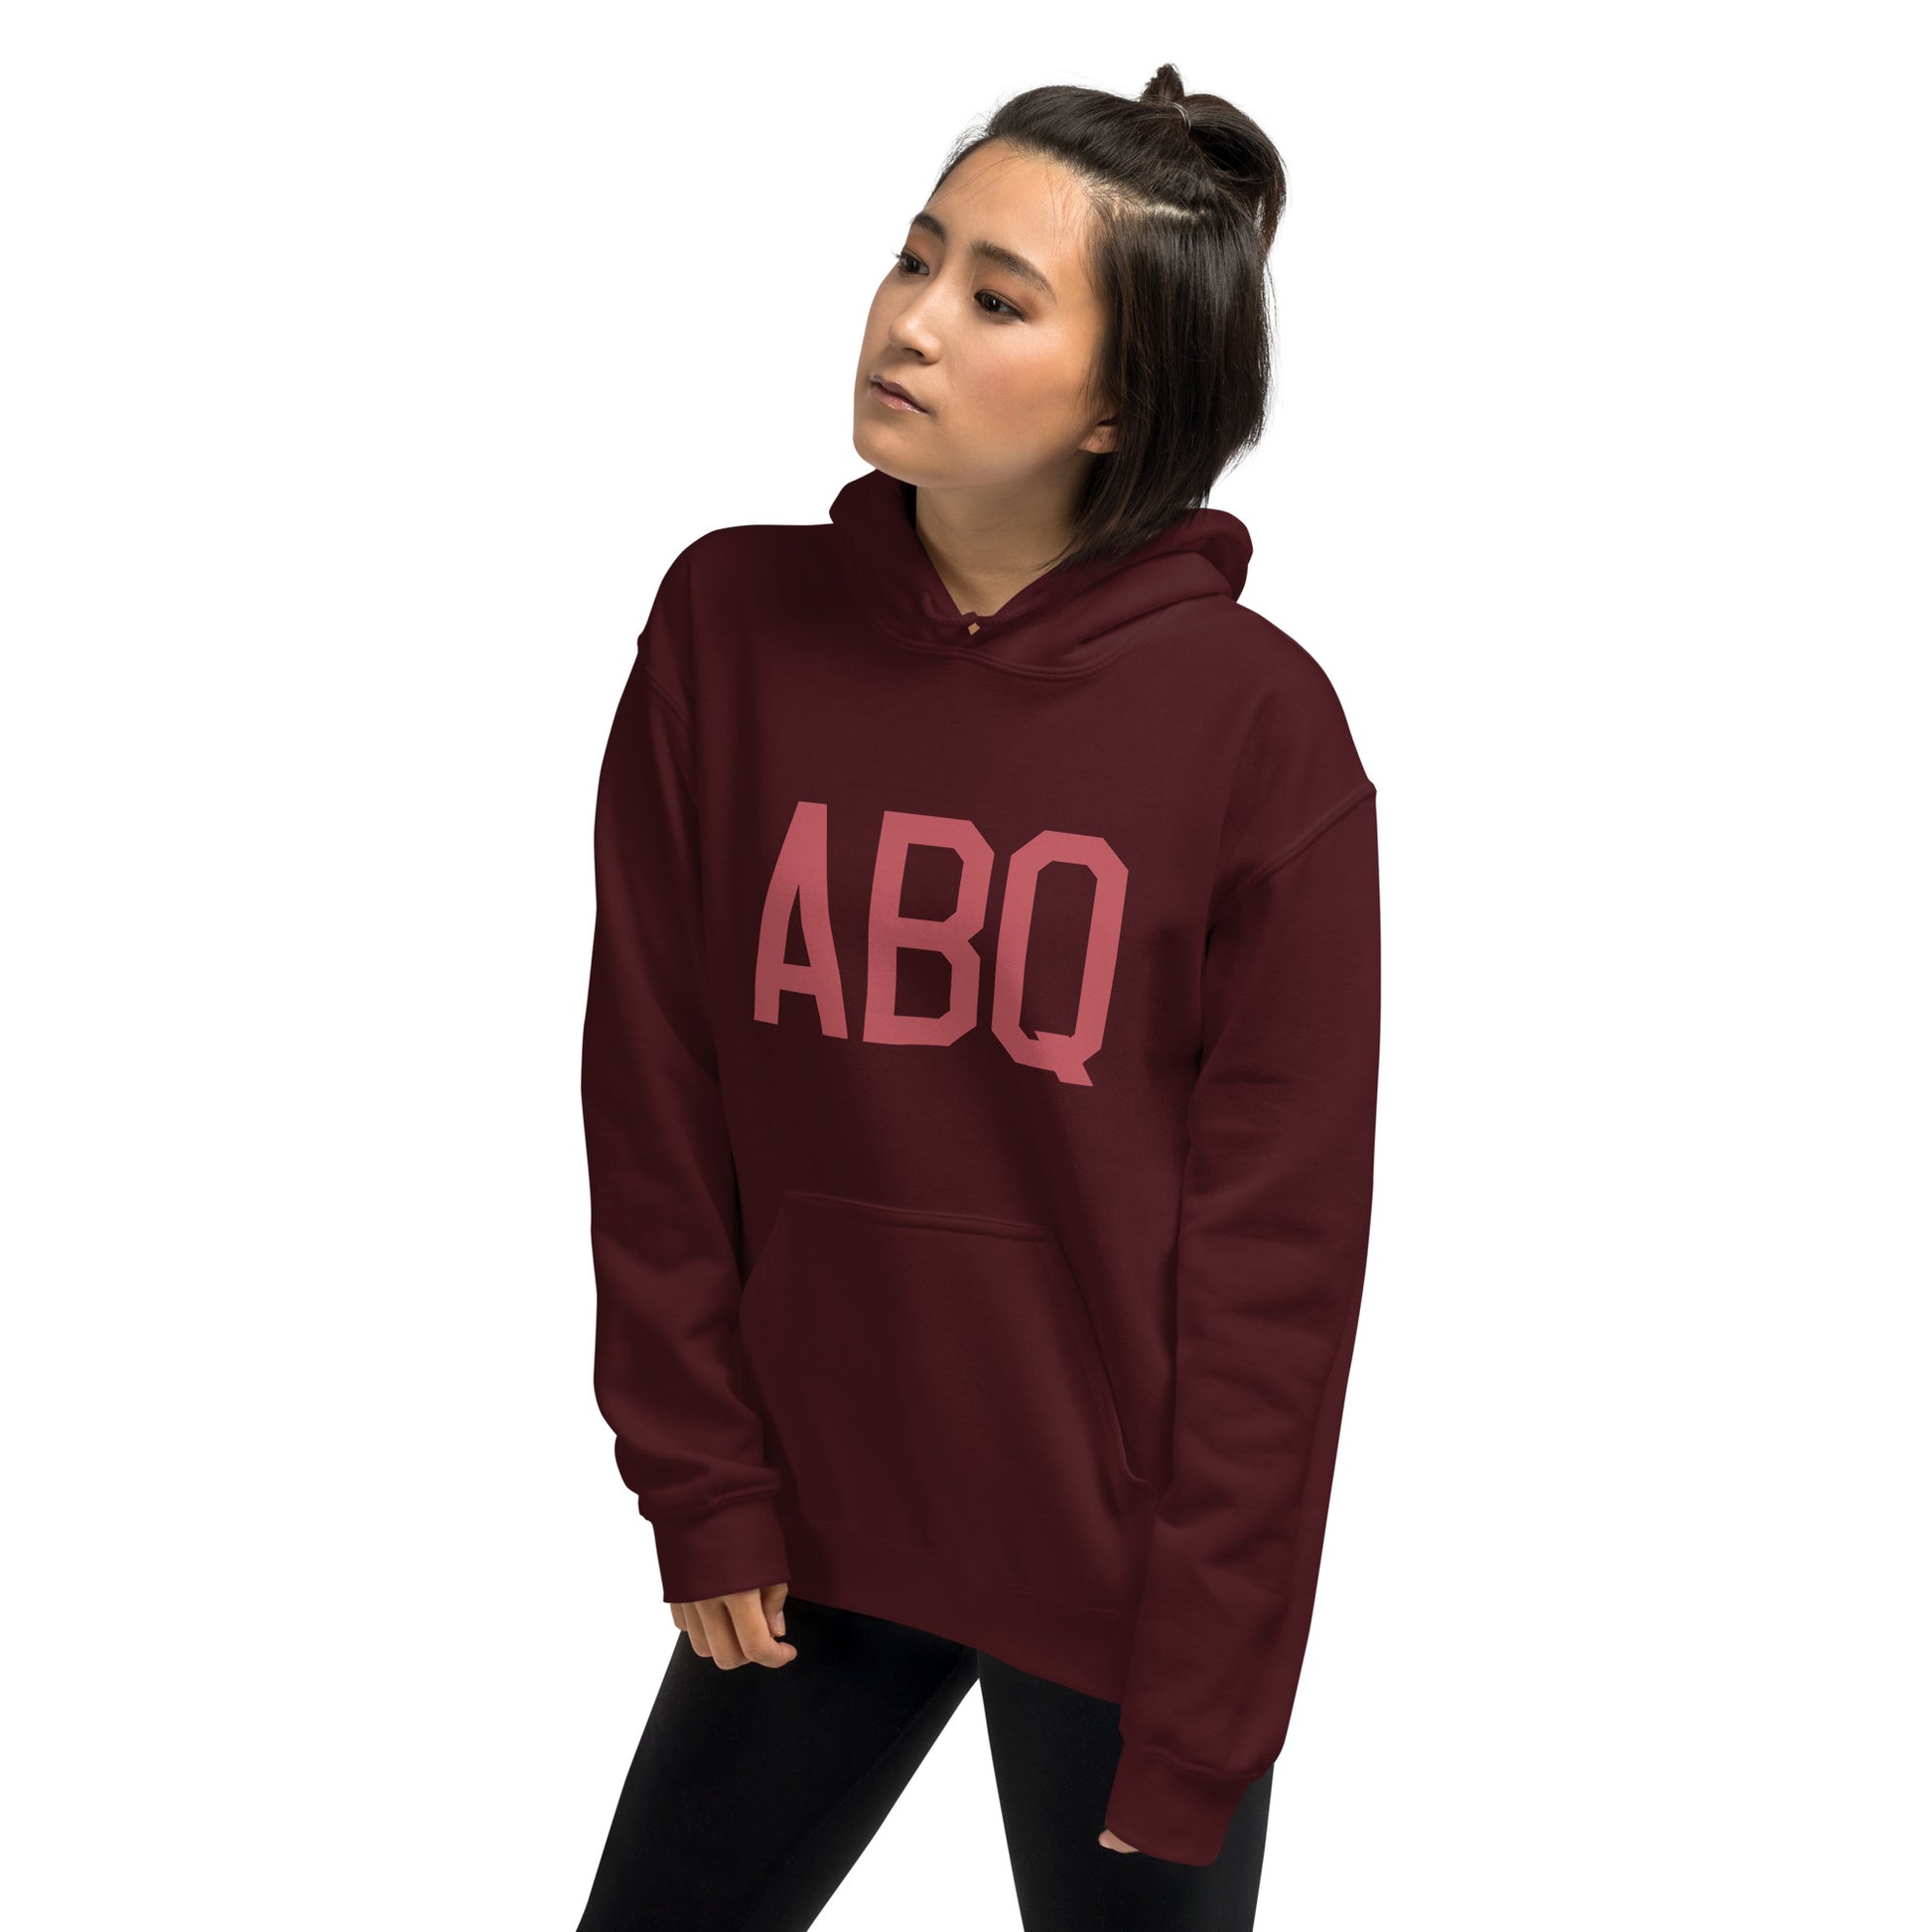 Aviation Enthusiast Hoodie - Deep Pink Graphic • ABQ Albuquerque • YHM Designs - Image 08